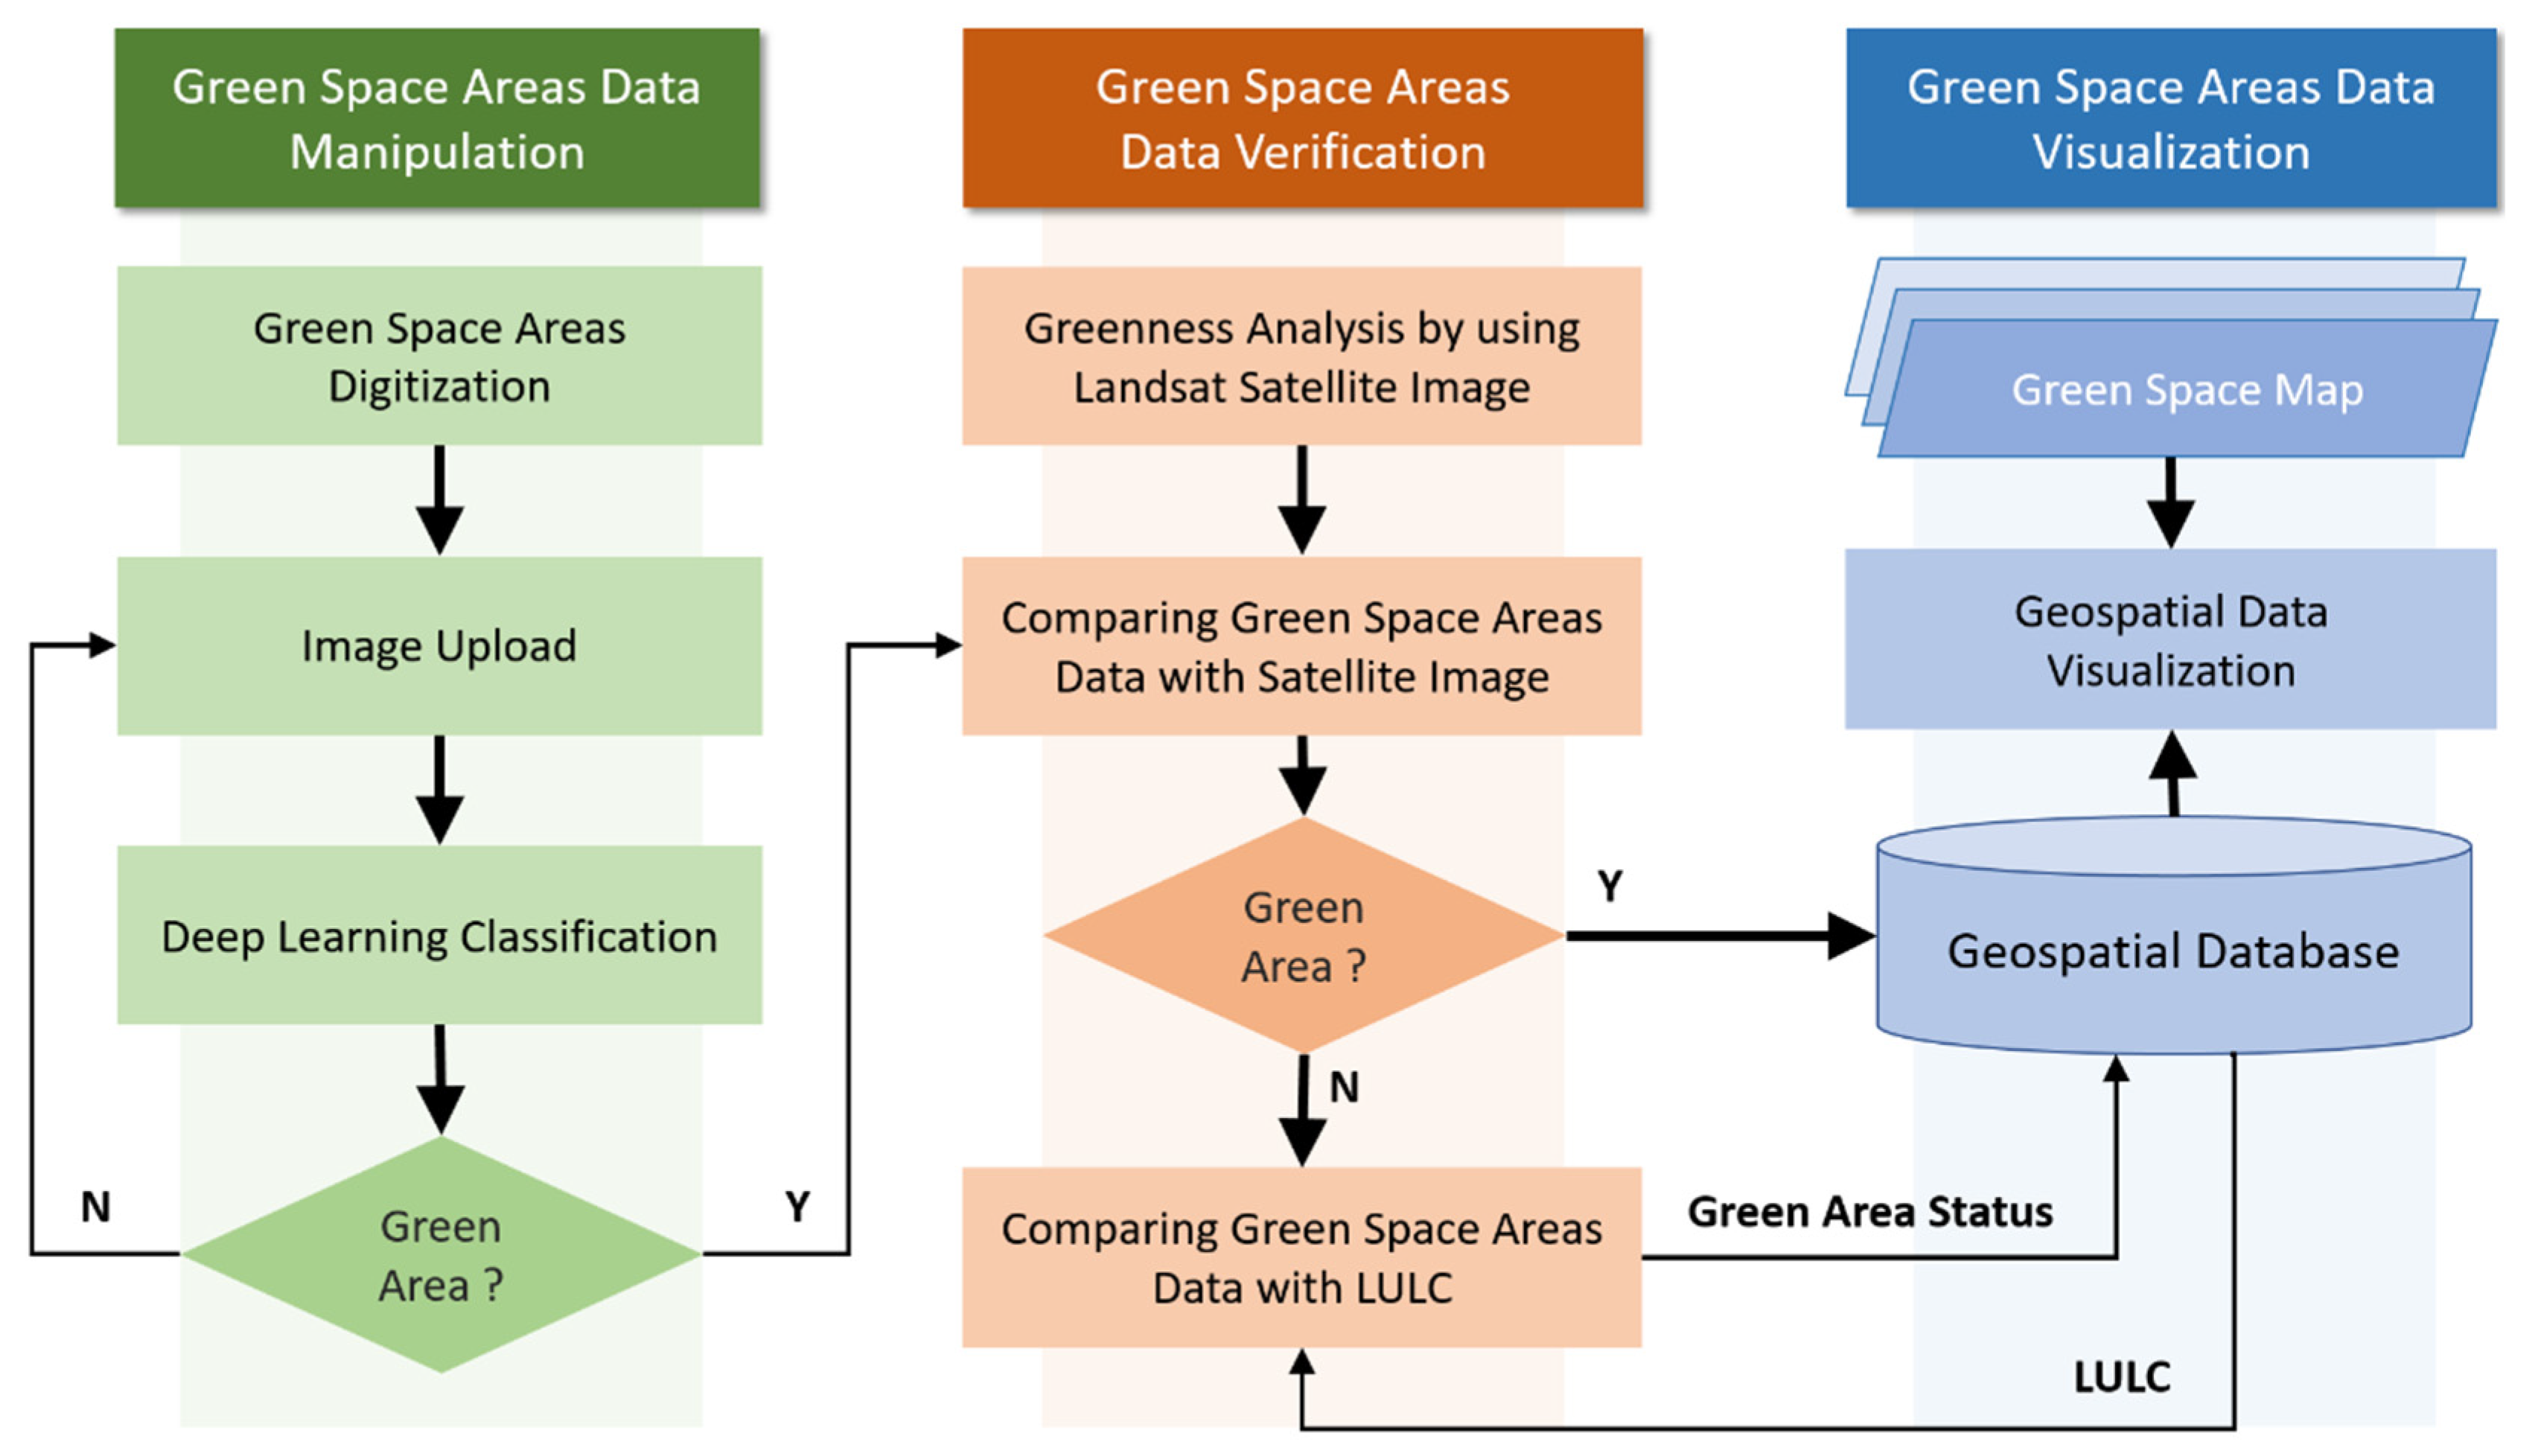 software recommendations - Options for crowdsourcing GIS data? - Geographic  Information Systems Stack Exchange